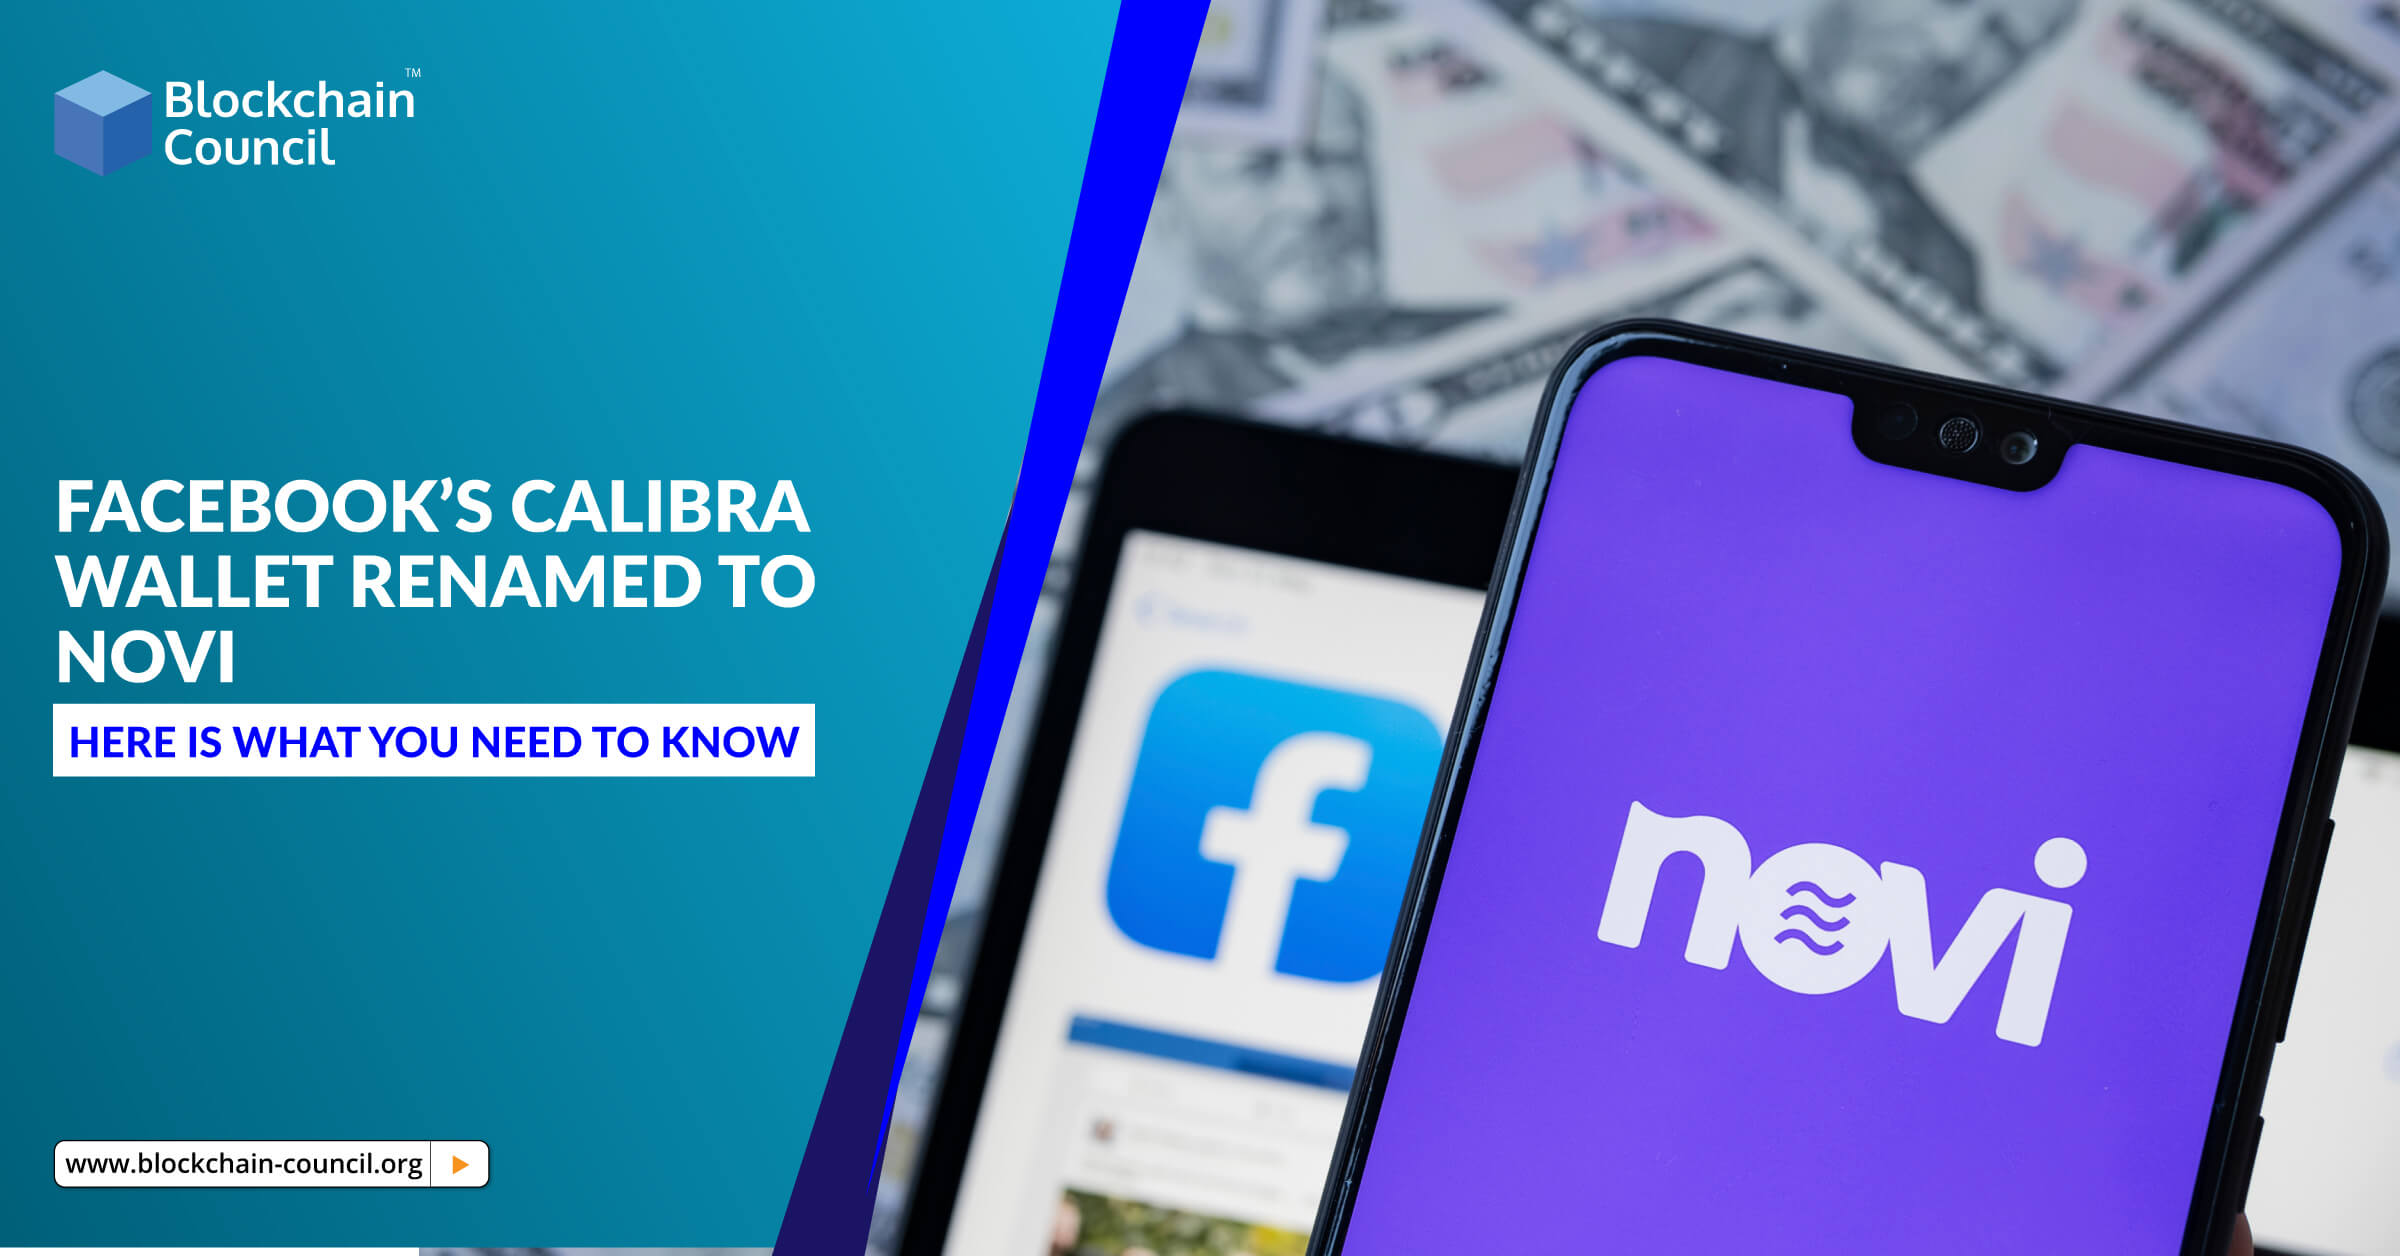 Facebook’s-Calibra-Wallet-Renamed-to-Novi--Purpose-and-Features